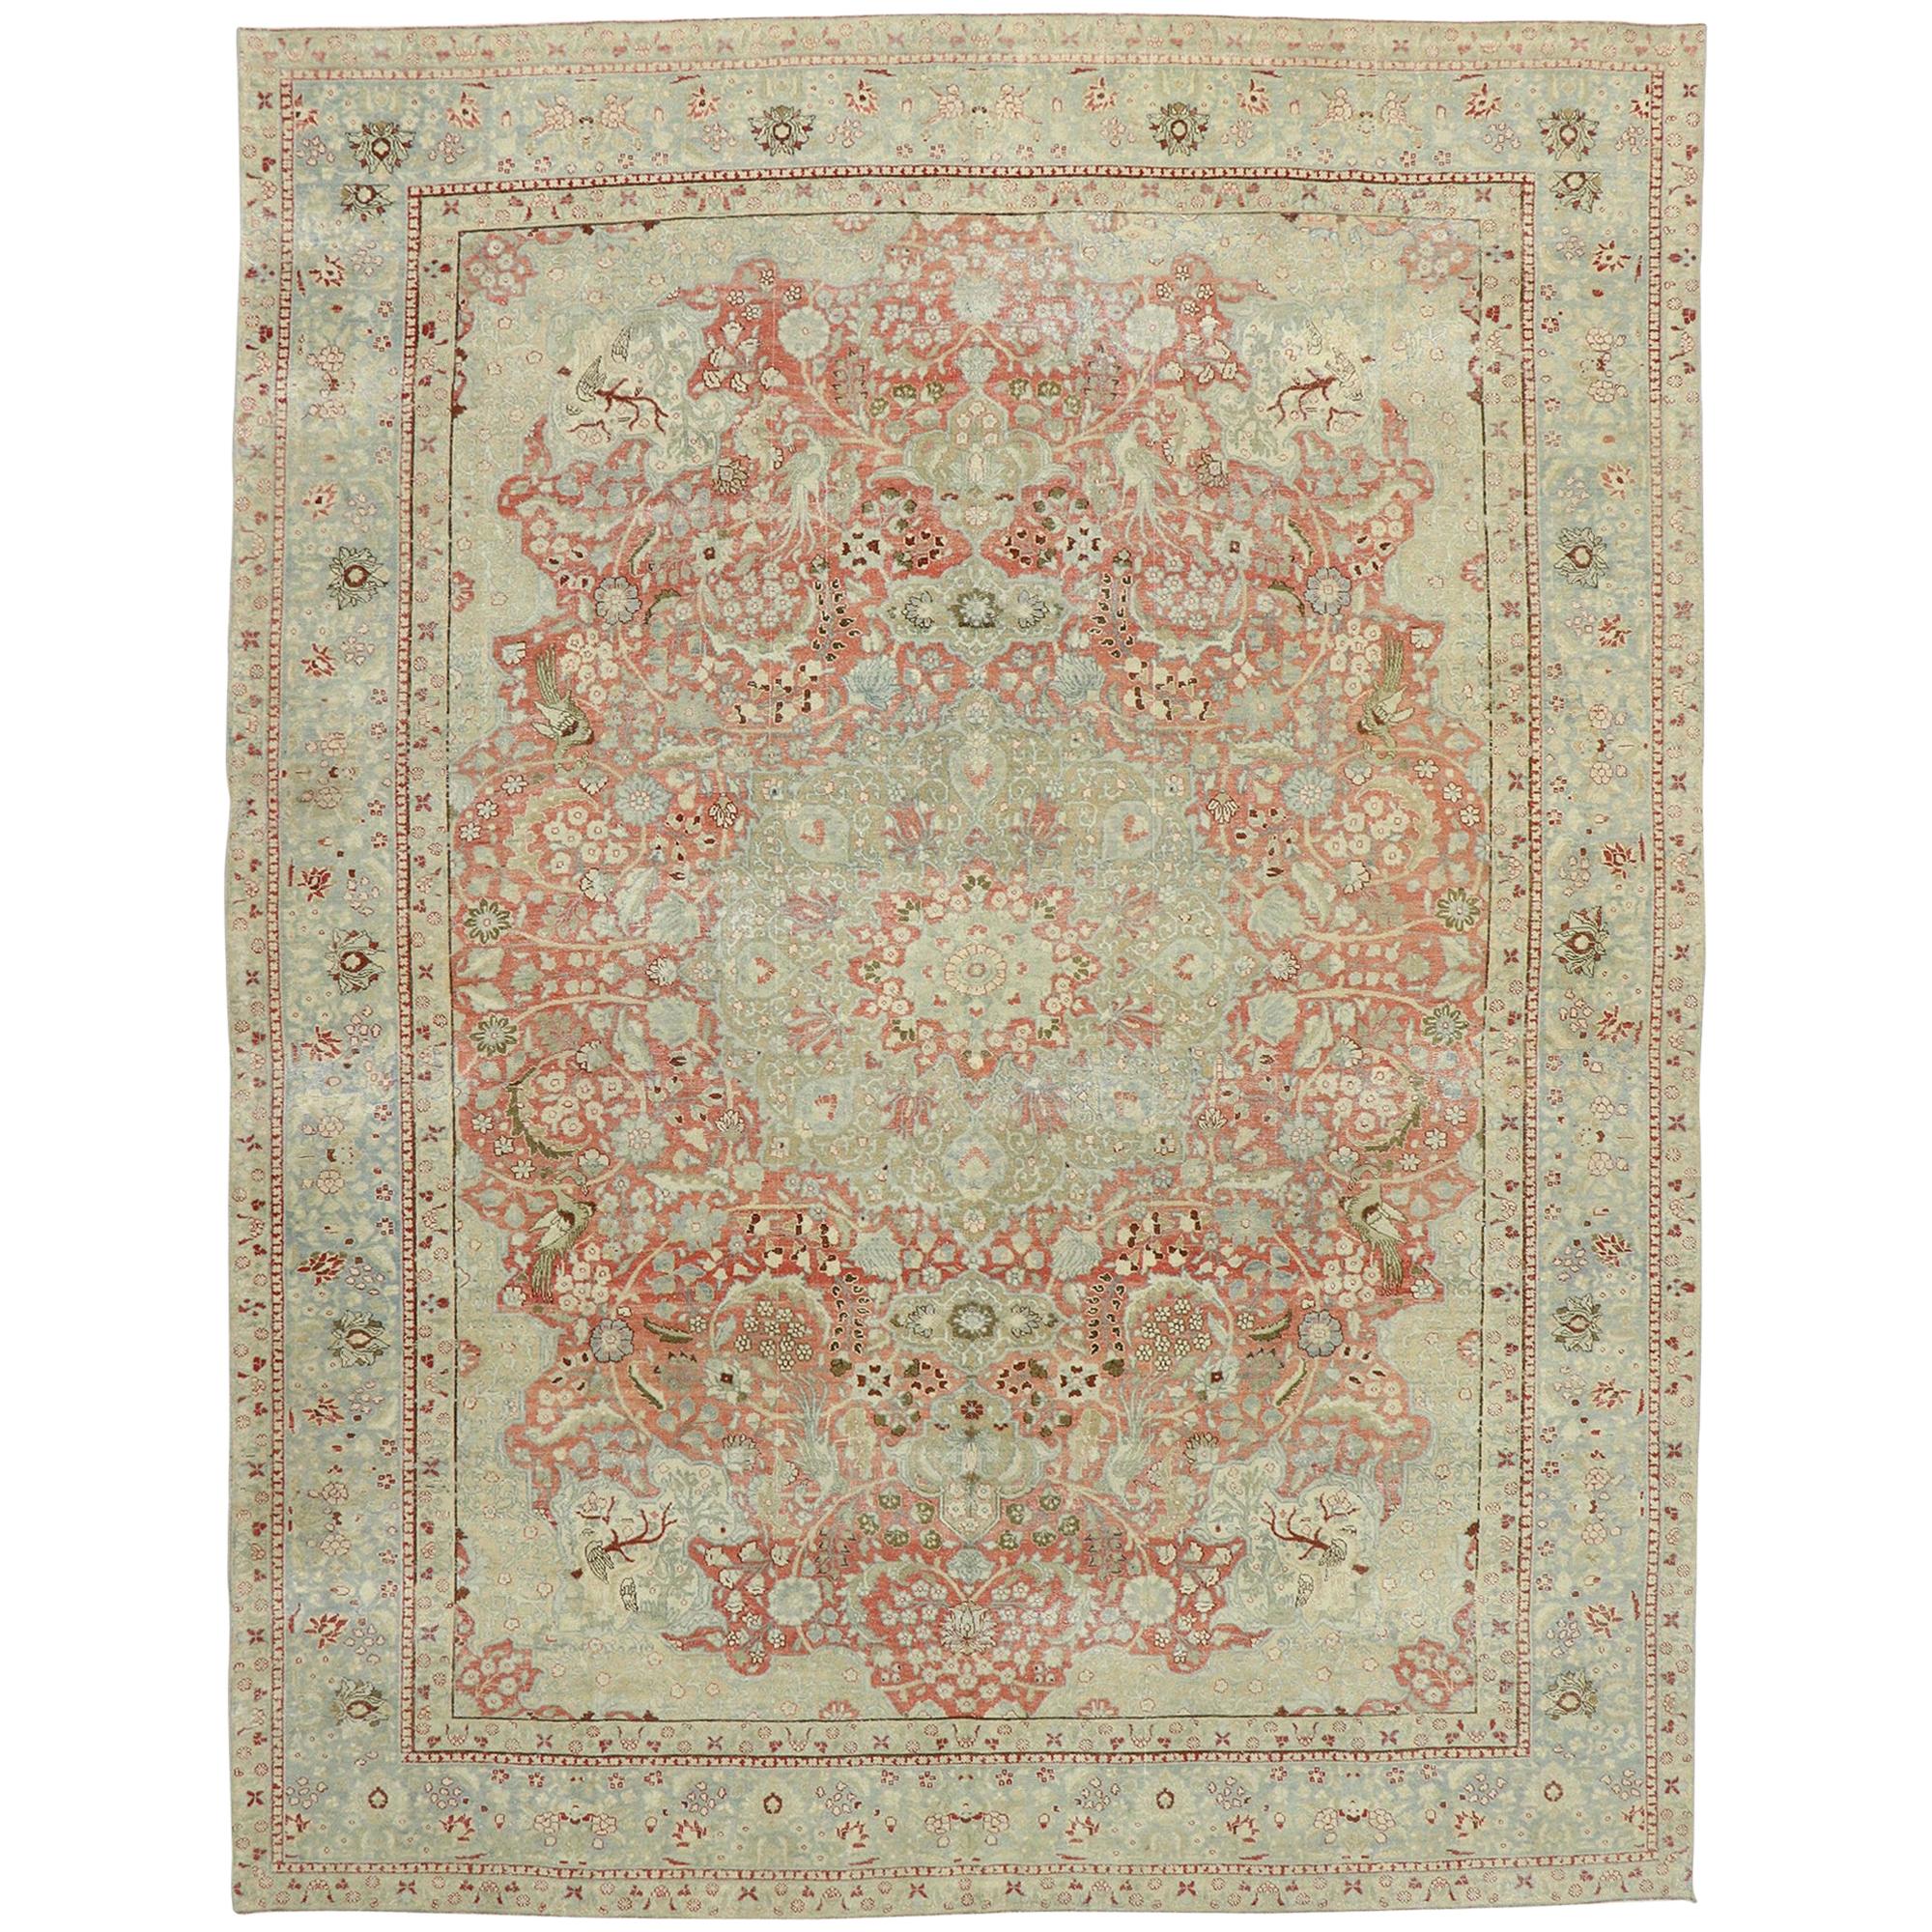 Distressed Antique Persian Tabriz Rug with Rustic English Cottage Style For Sale